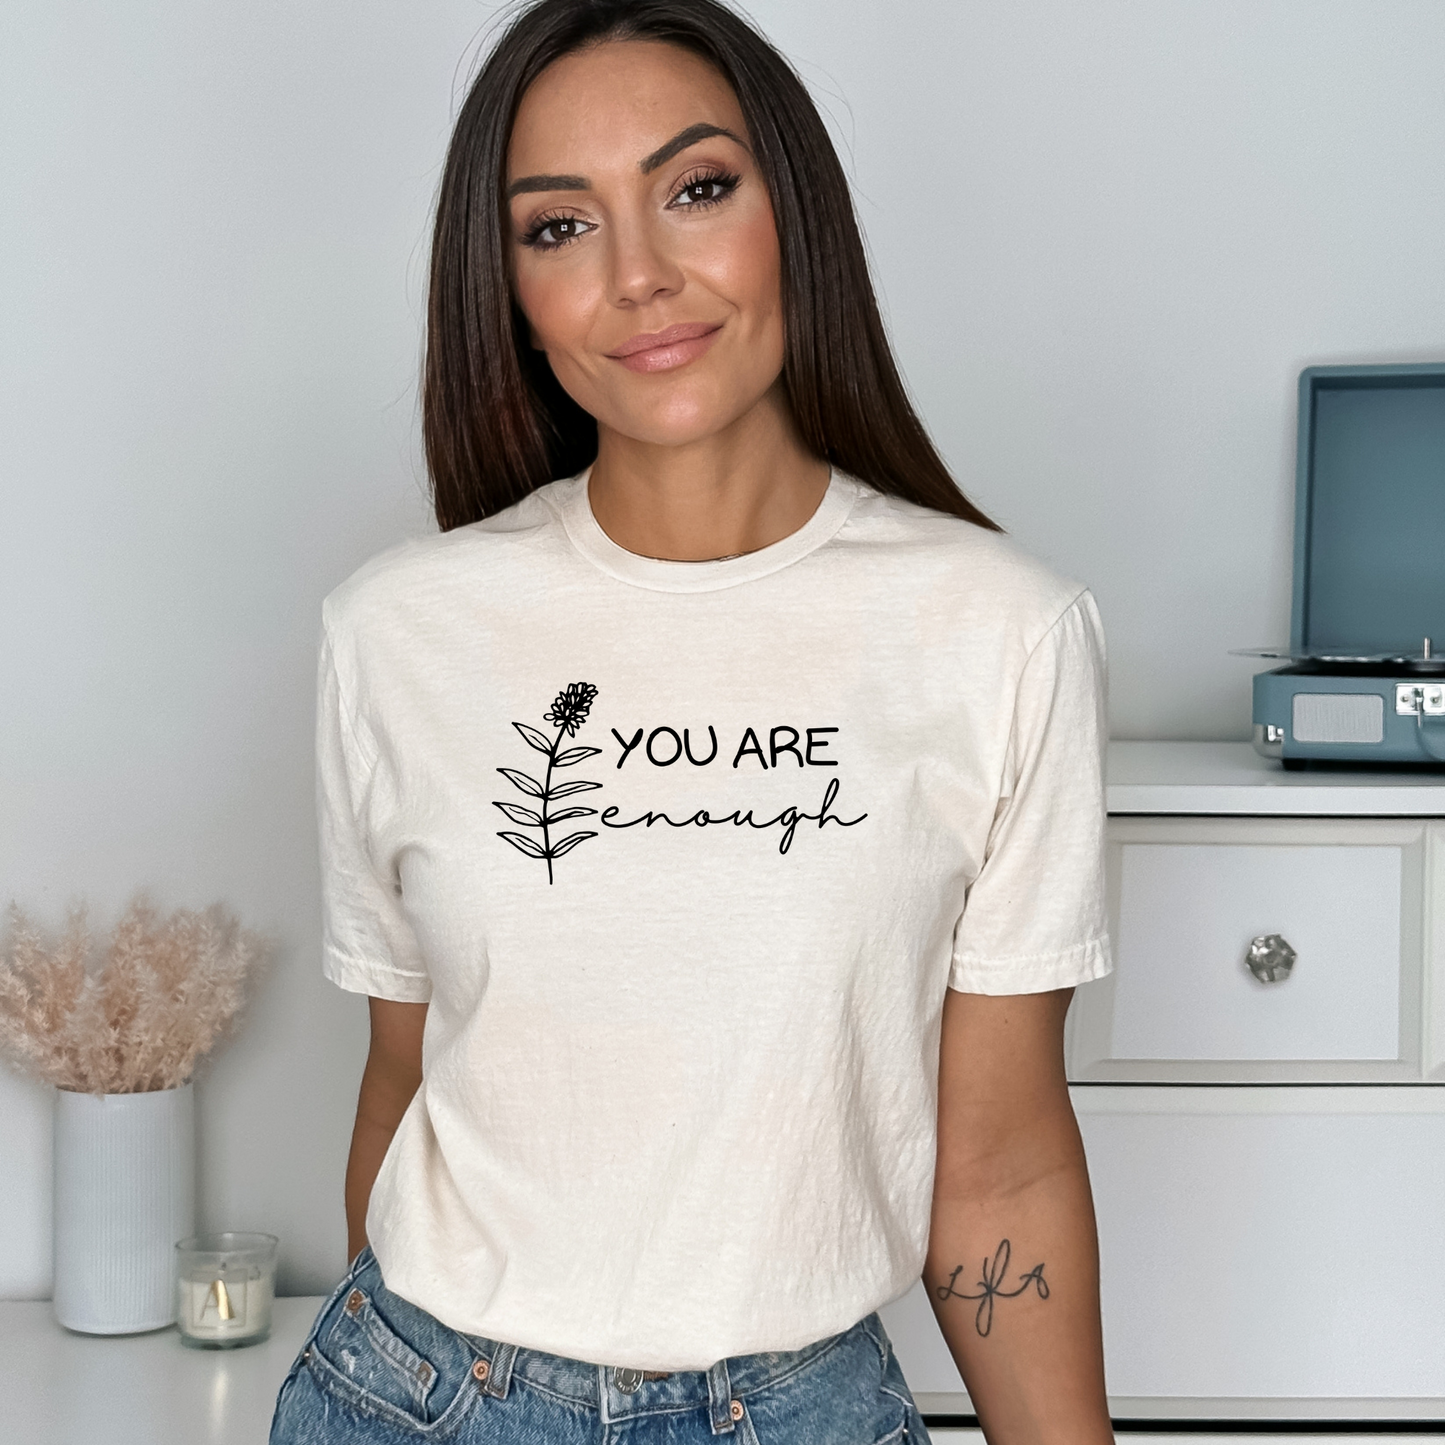 You are enough - Adult Unisex Soft Inspirational T-shirt